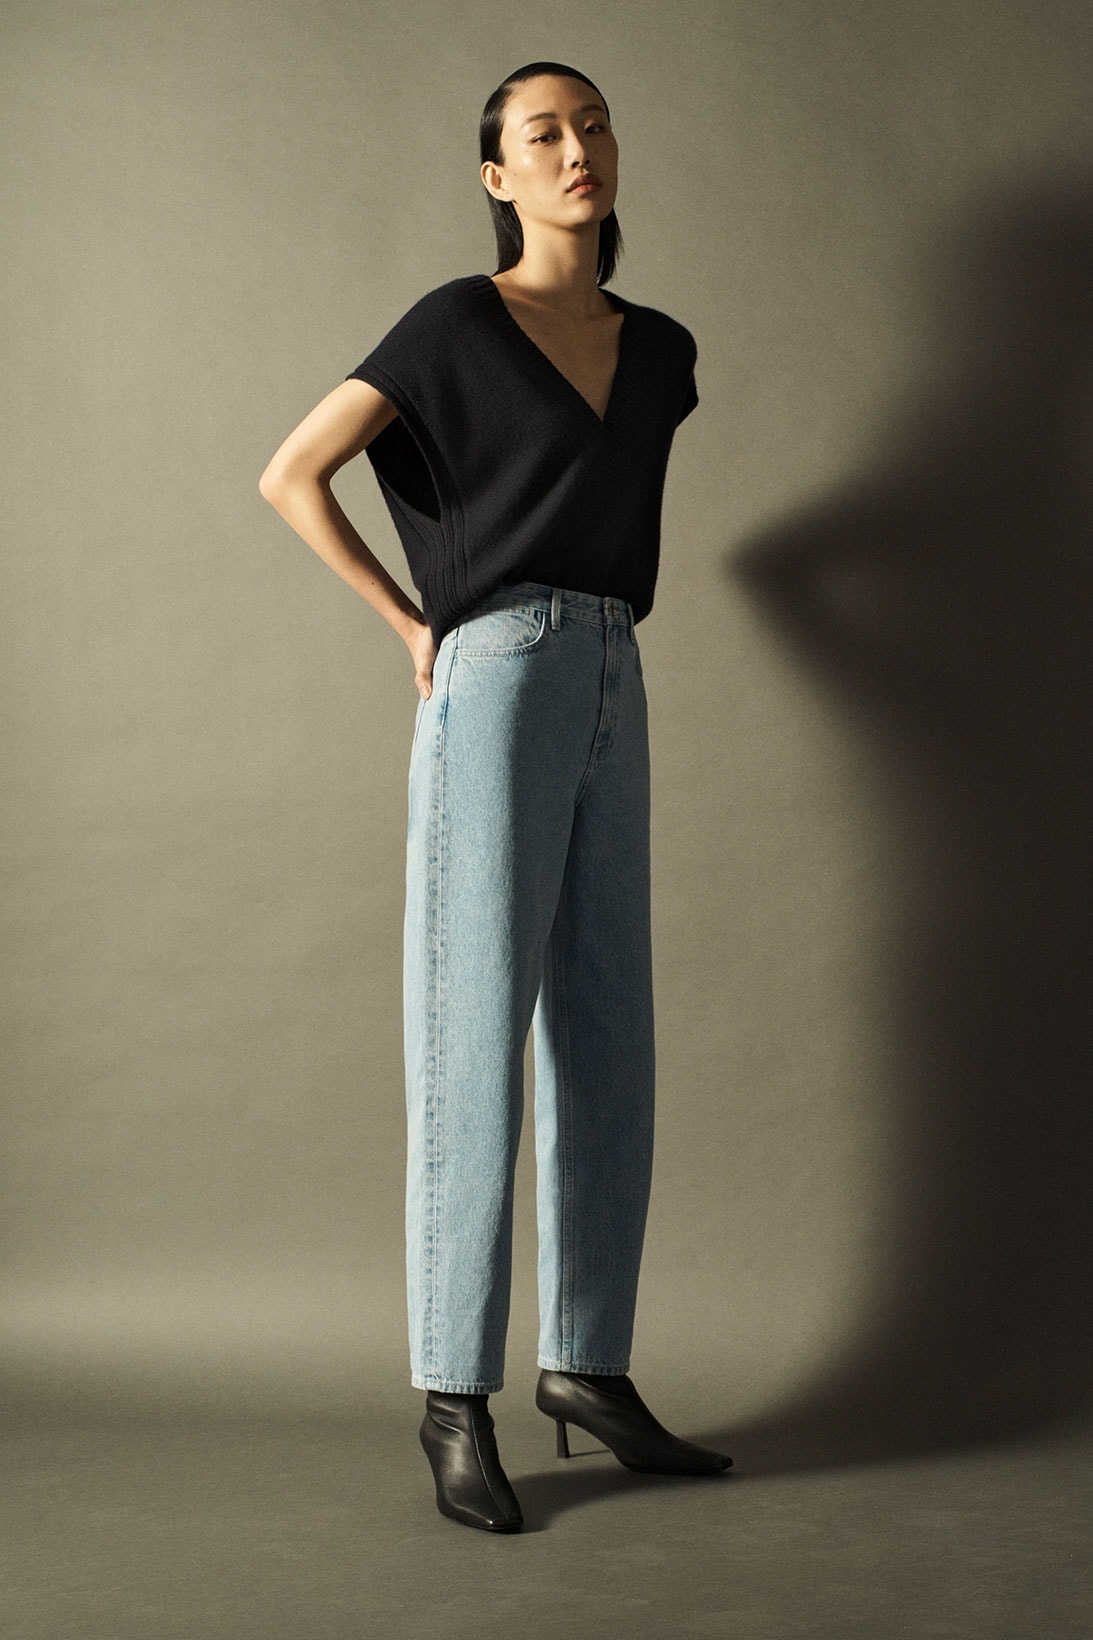 cos spring summer 2021 ss21 sustainable denim collection jeans sora choi black sweater vest heels